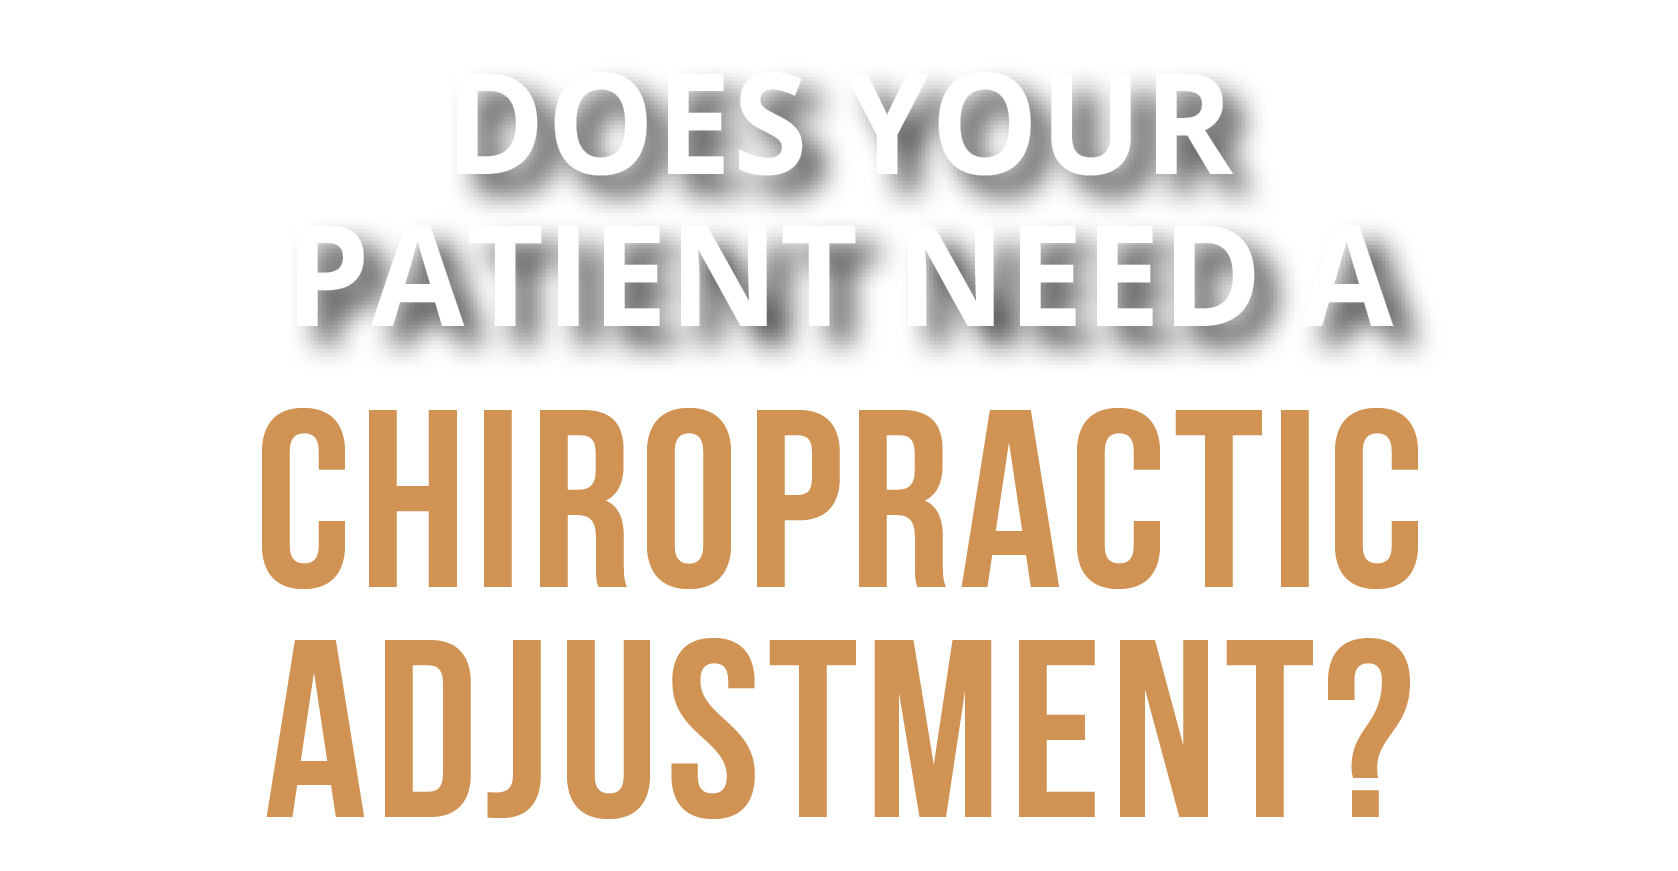 Does Your Patient Need a Chiropractic Adjustment?